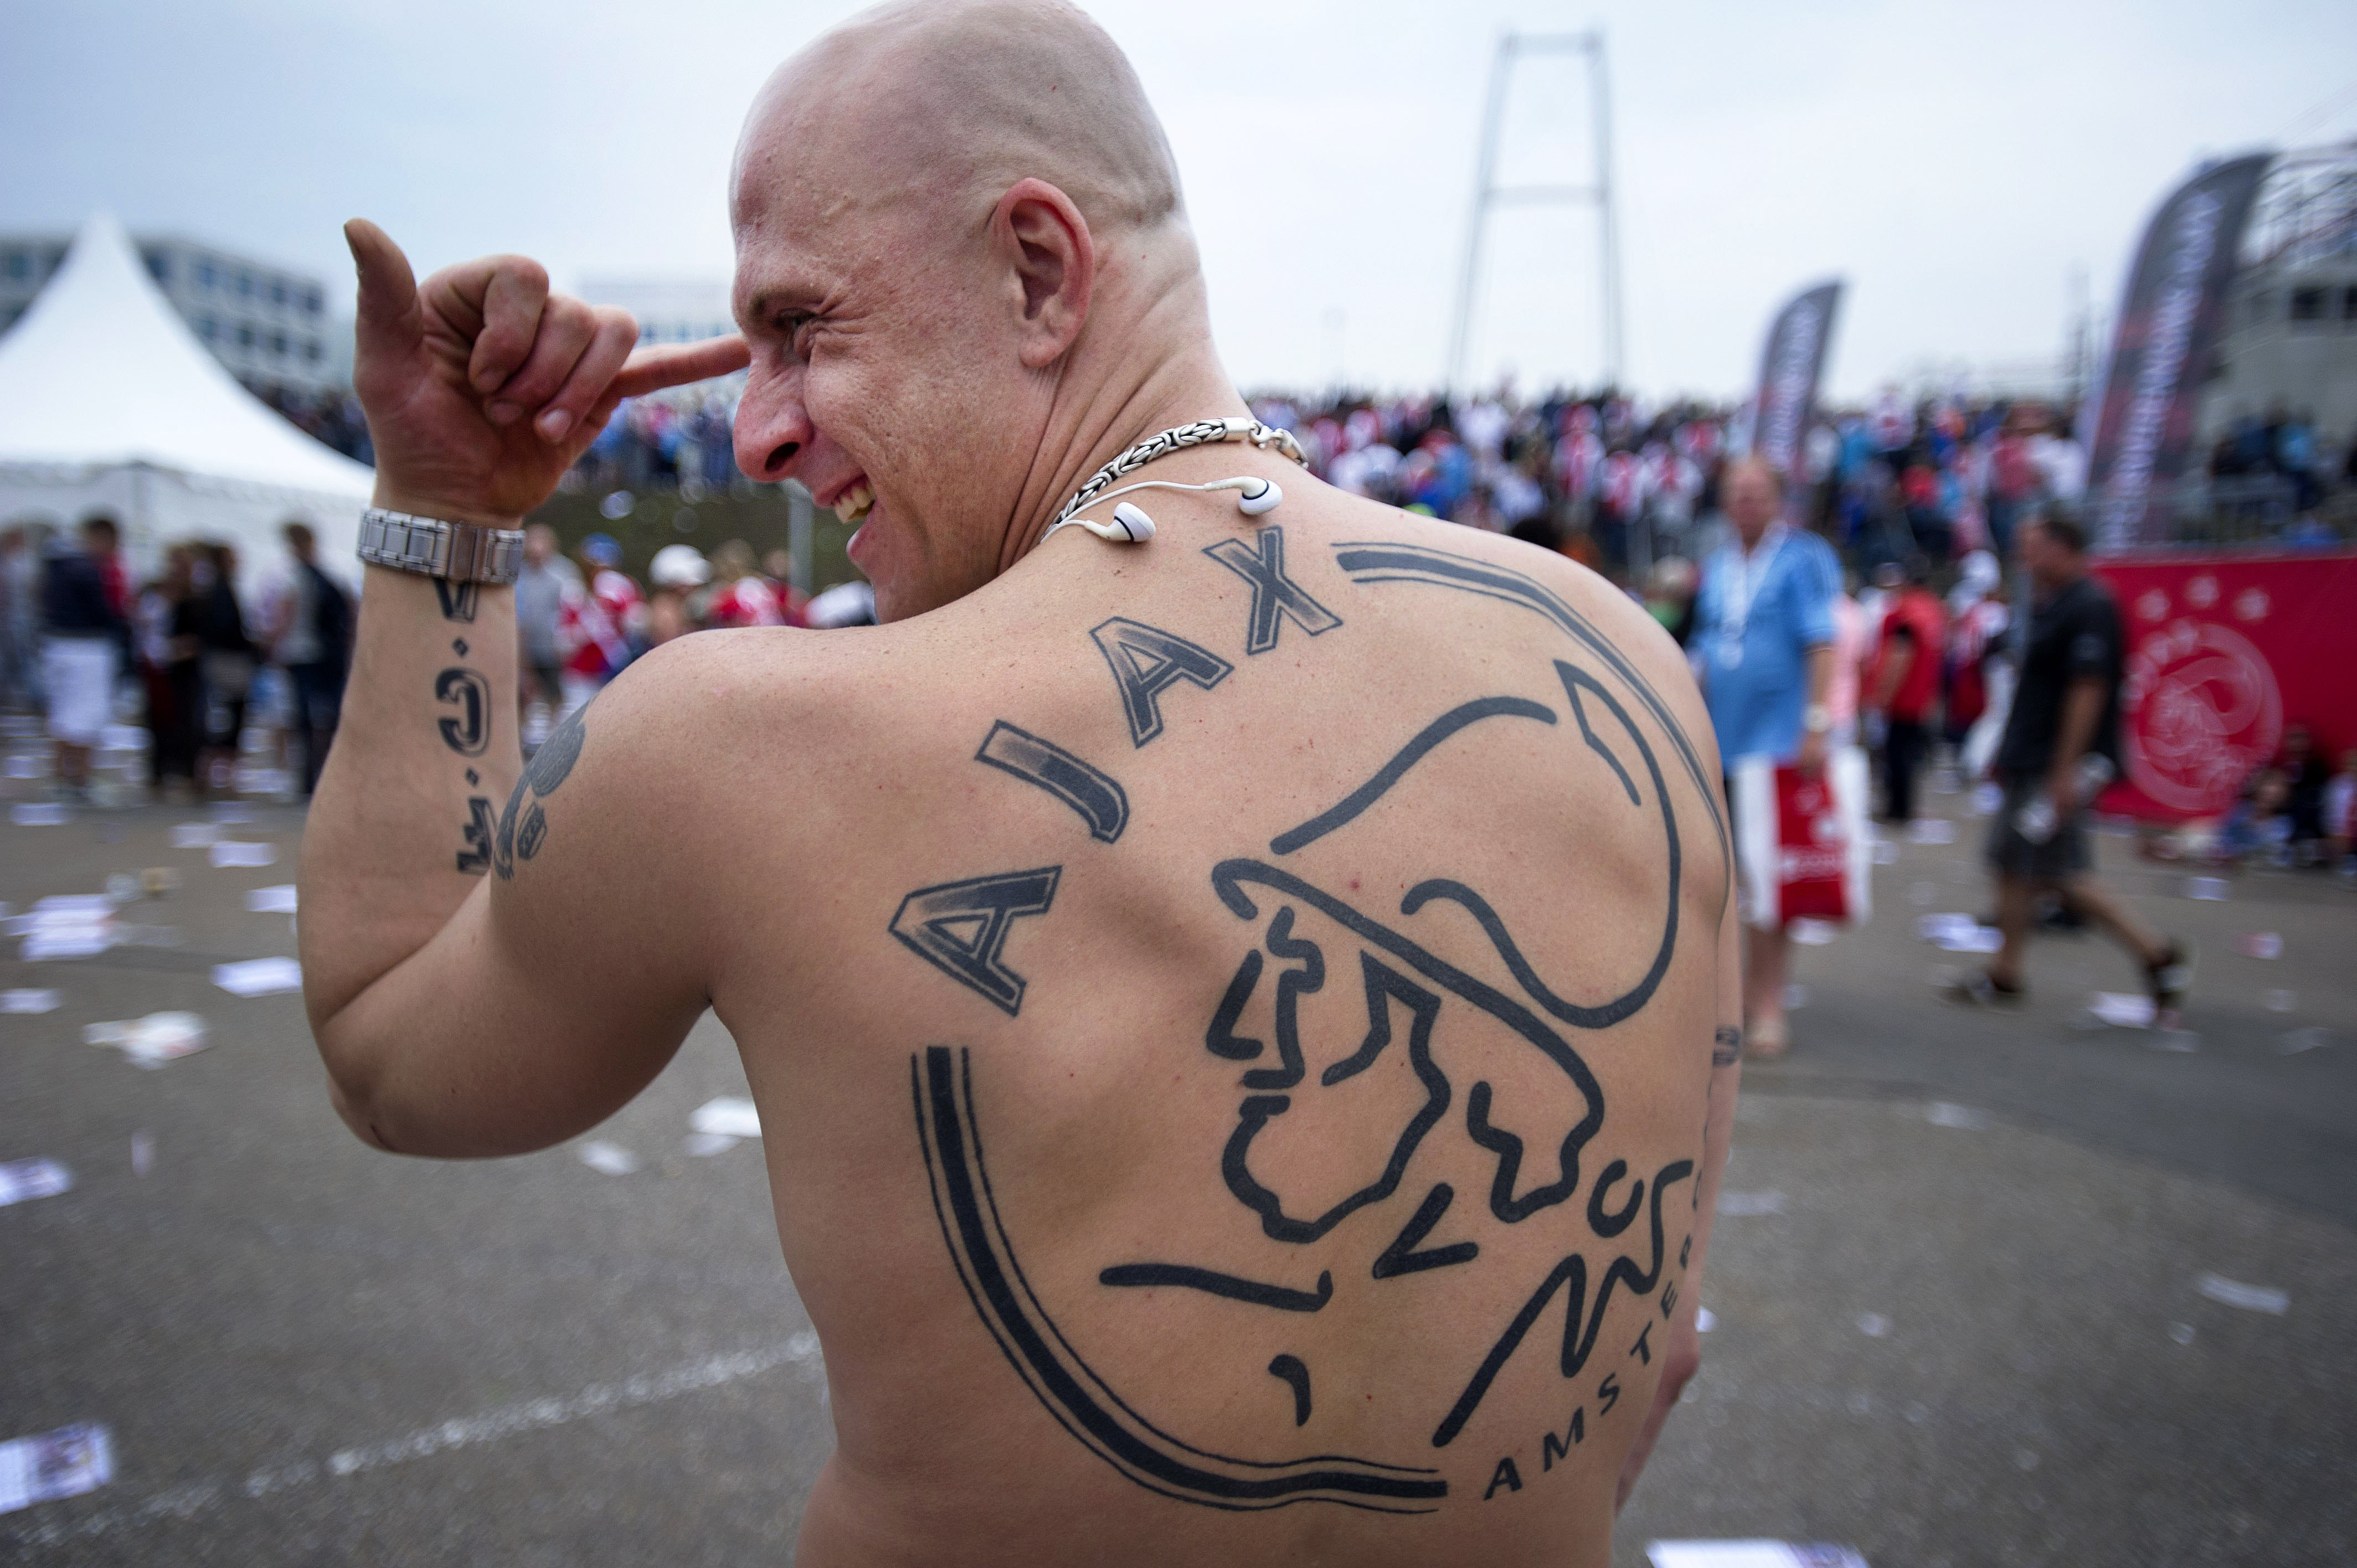 An Ajax soccer fan shows off his tattoo at Amsterdam Arena during the team's opening day on August 3, 2011.